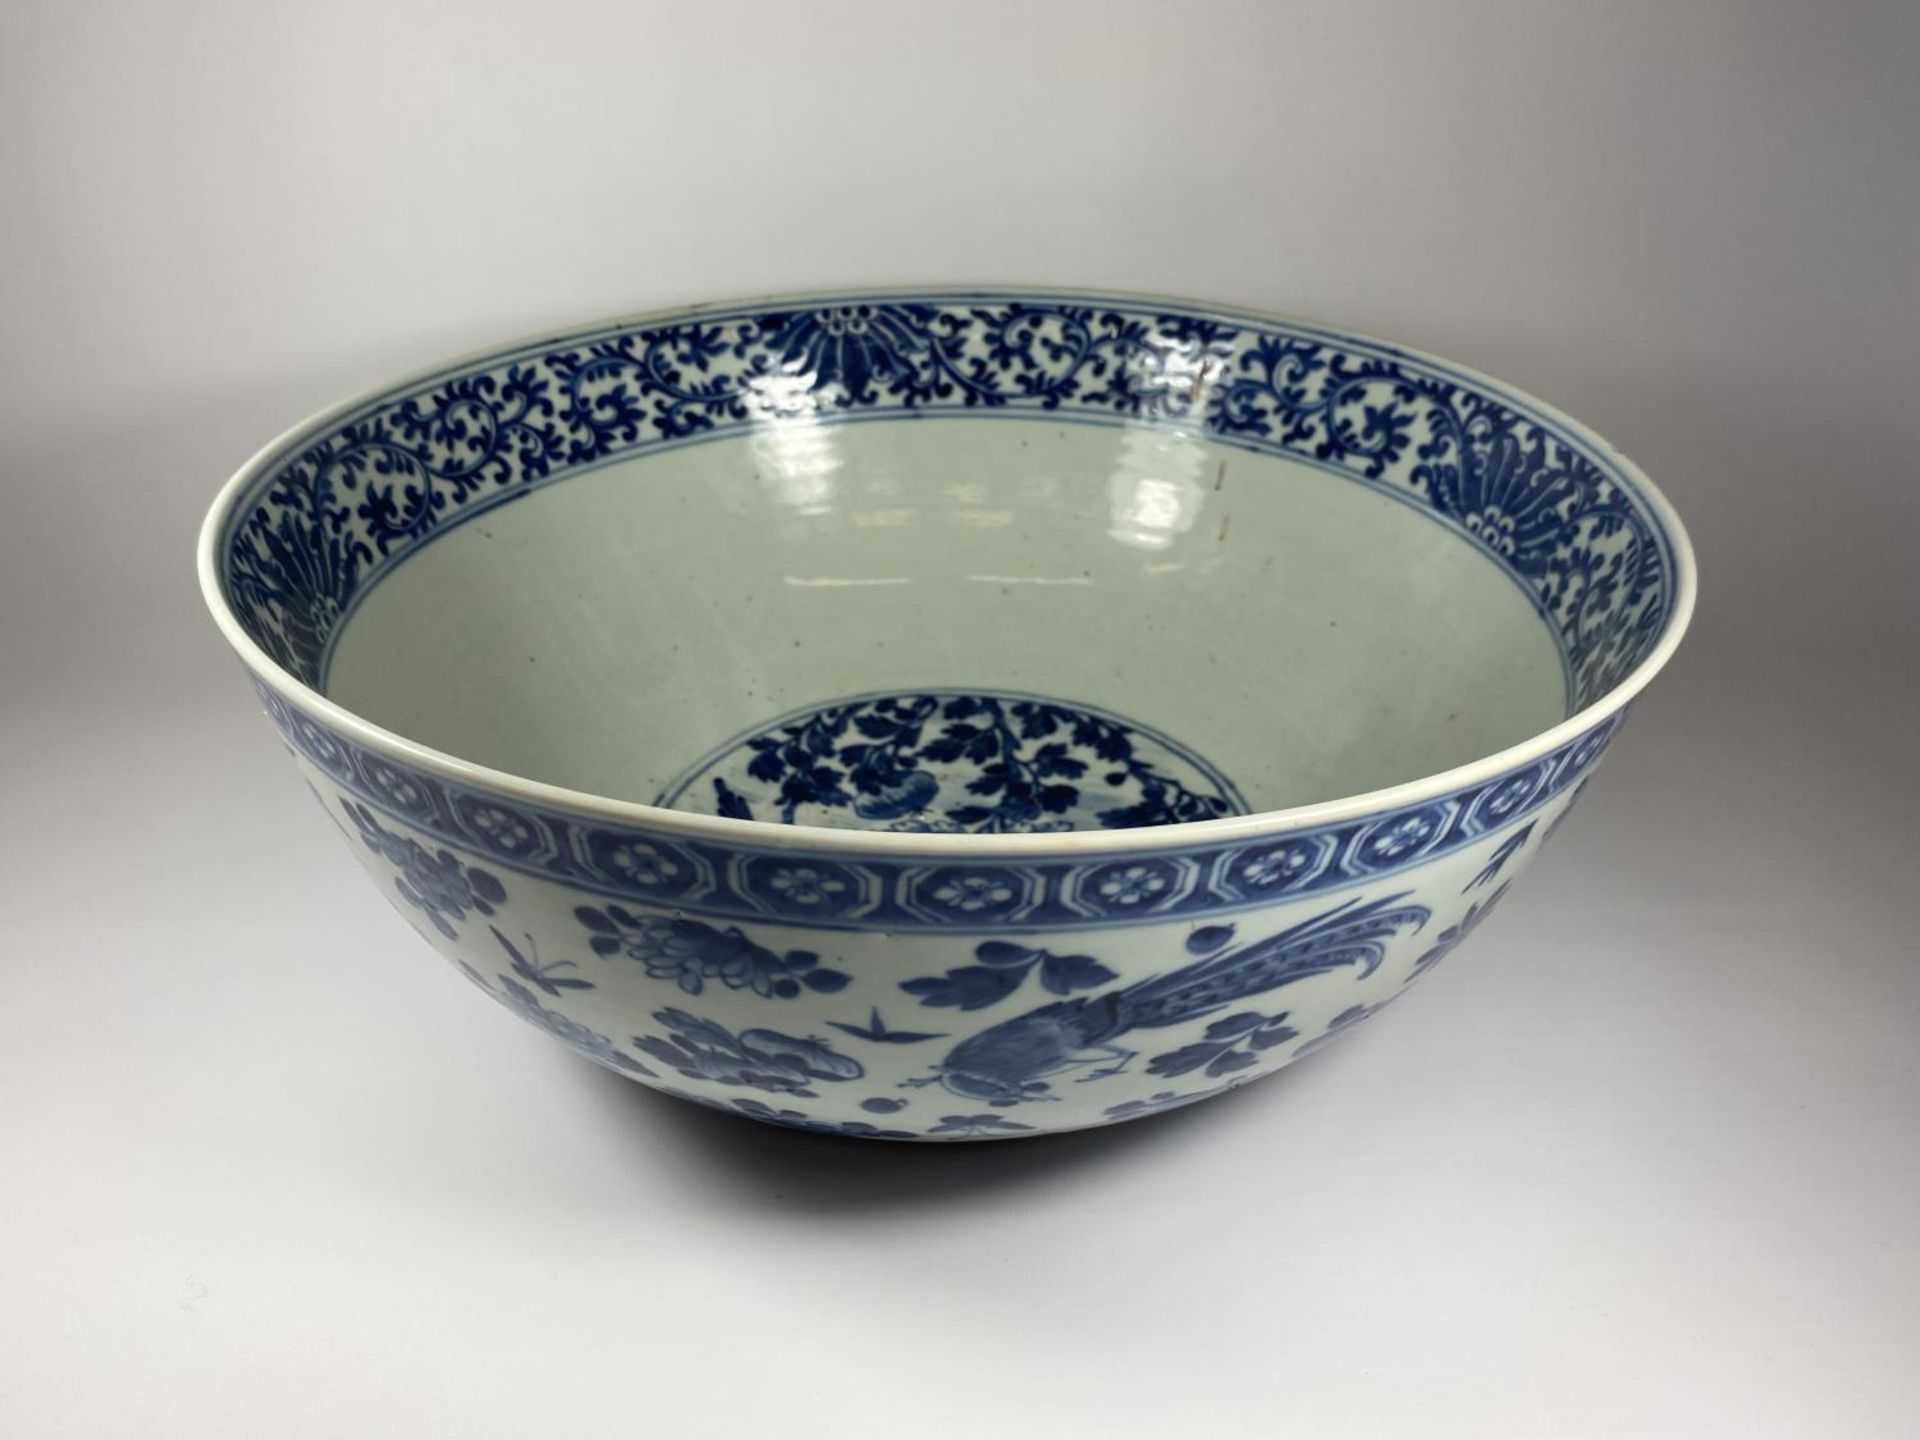 A LARGE AND IMPRESSIVE EARLY 19TH CENTURY CHINESE QING BLUE AND WHITE PORCELAIN PUNCH / FRUIT BOWL